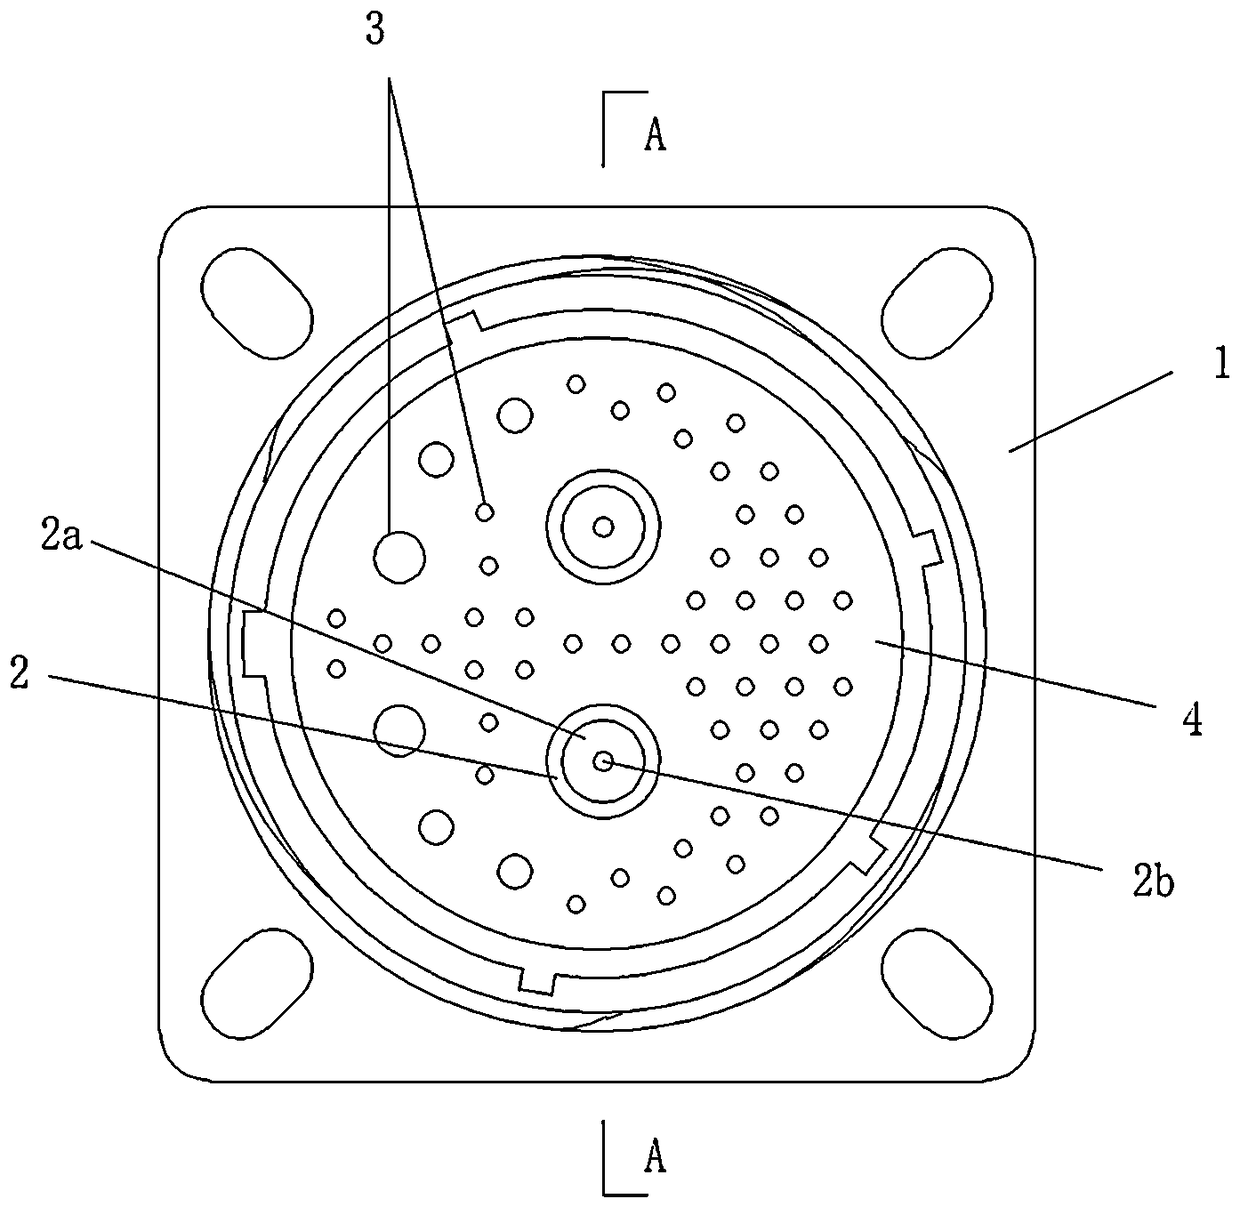 Integrated sealing connector